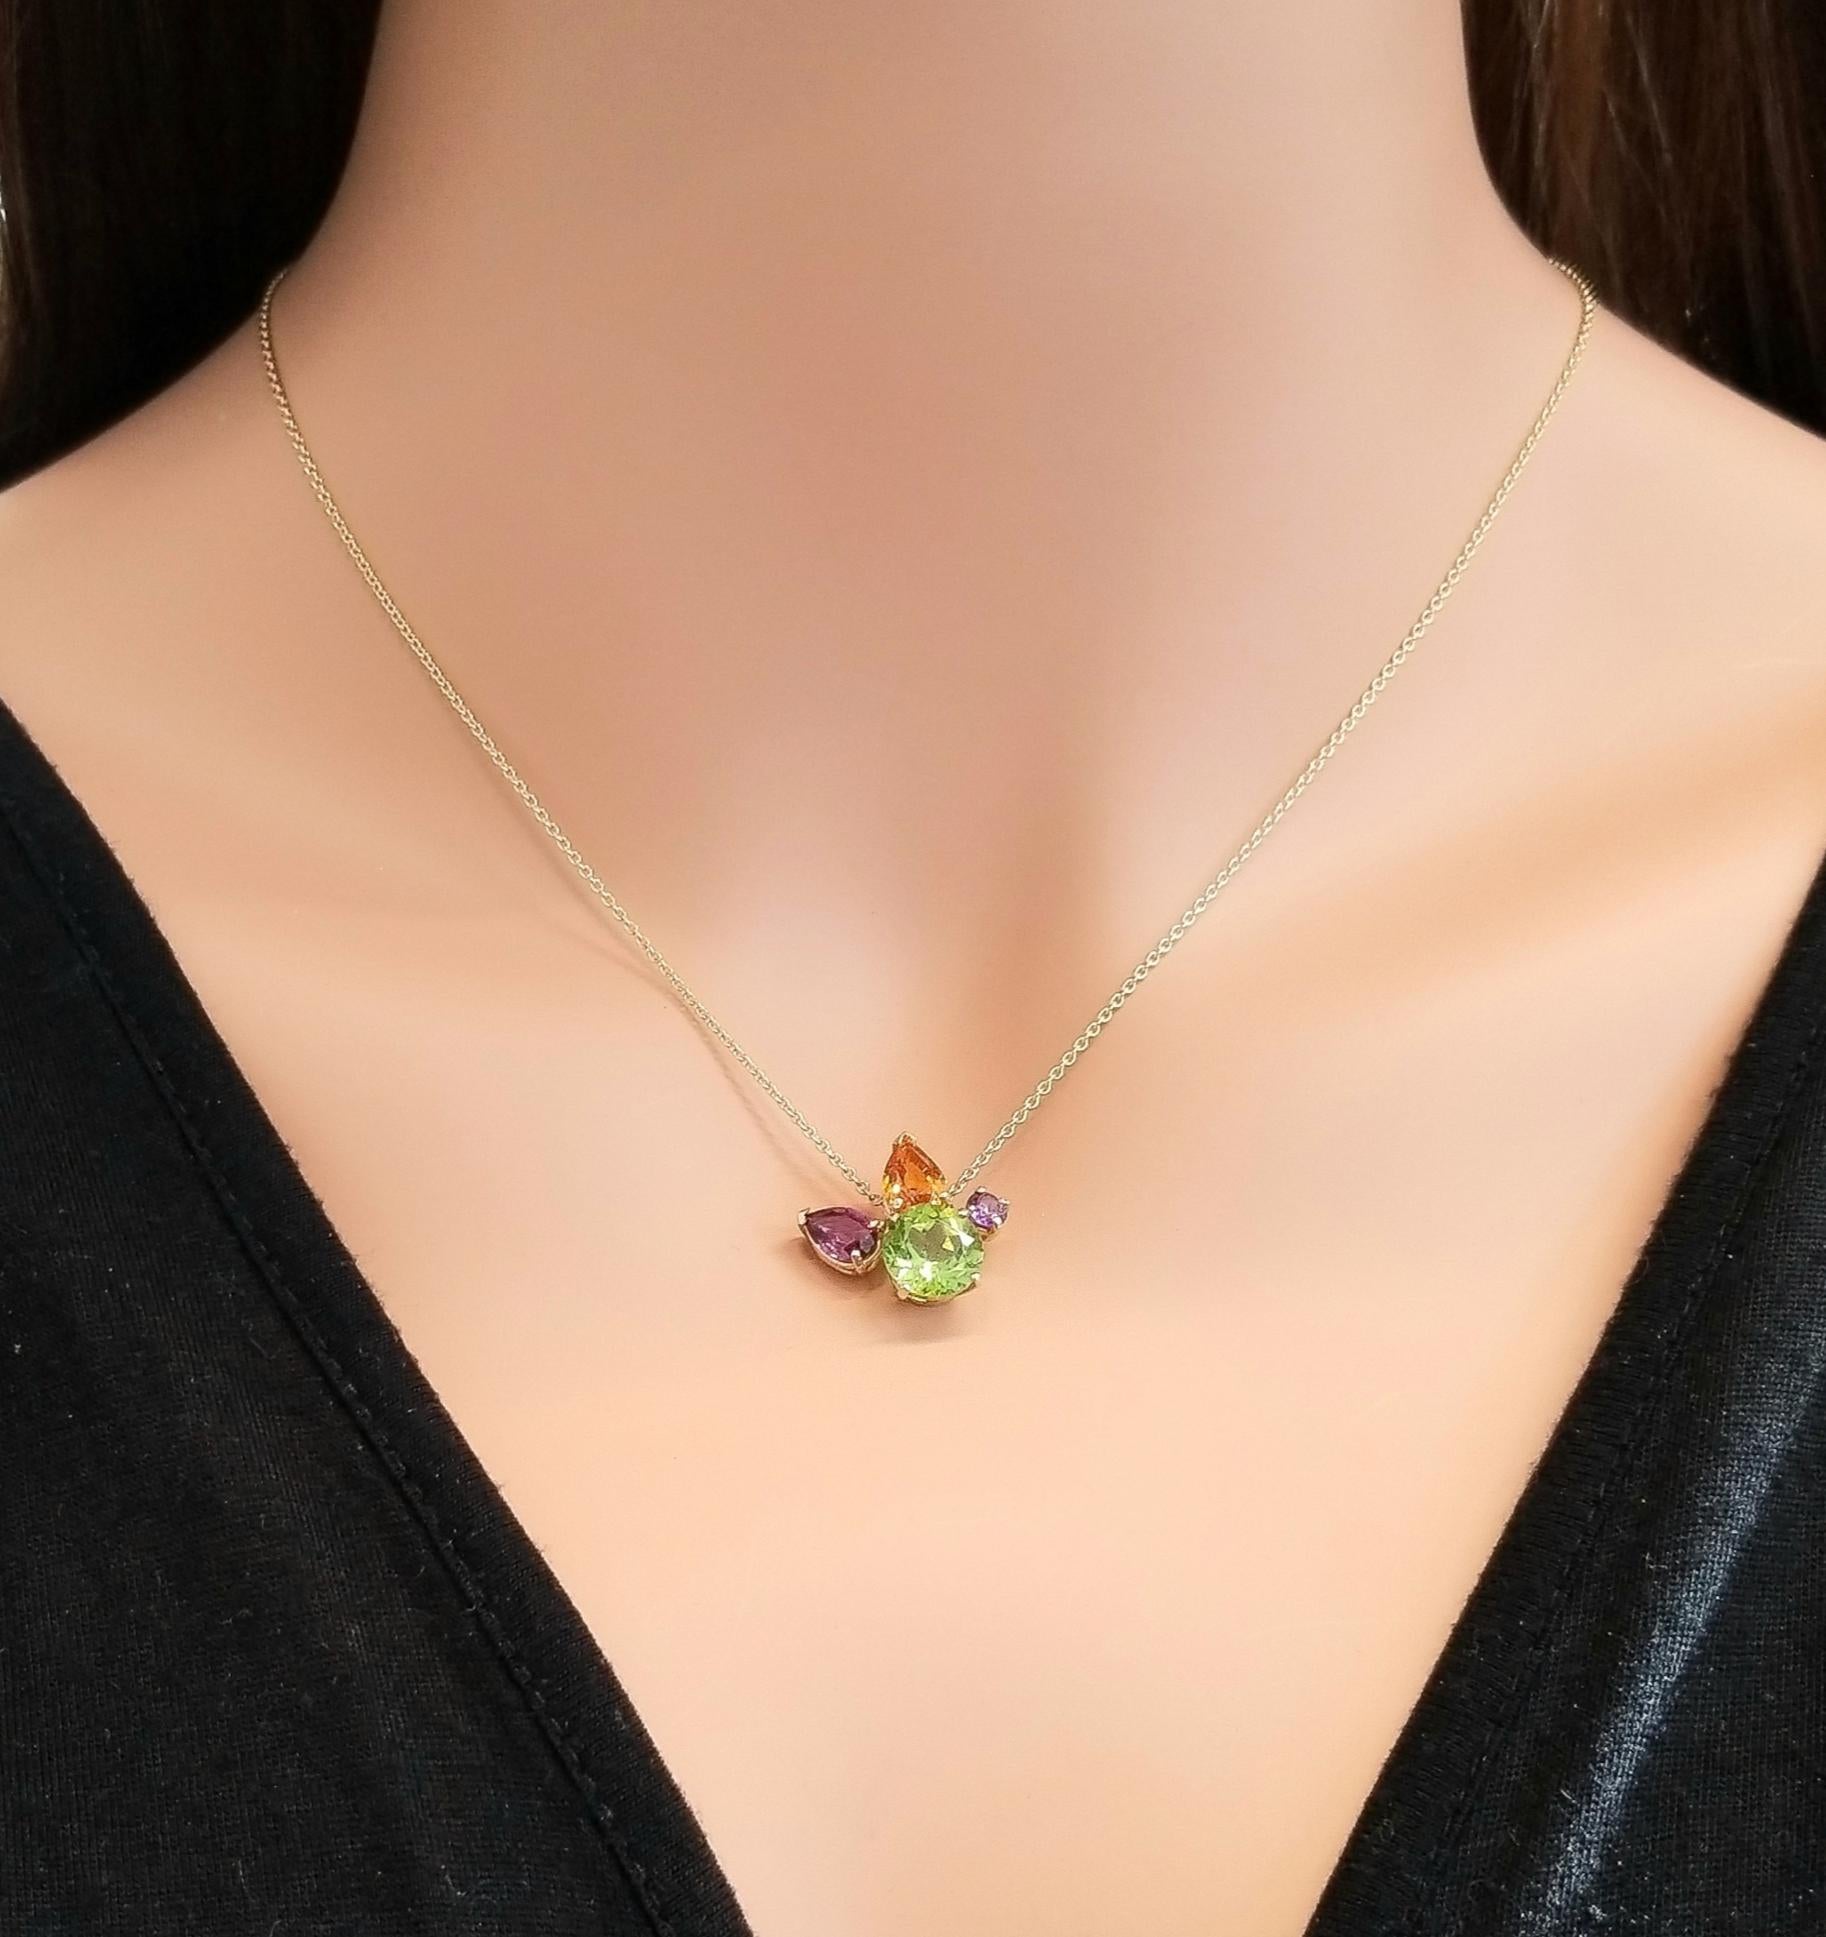  This rainbow gem cluster necklace is the ultimate arrangement of color play. 5.41 carats of semi-precious colored gems adorn this vibrant necklace featuring one peridot, one amethyst, citrine, and purple garnet, in a beautiful bouquet. All of the